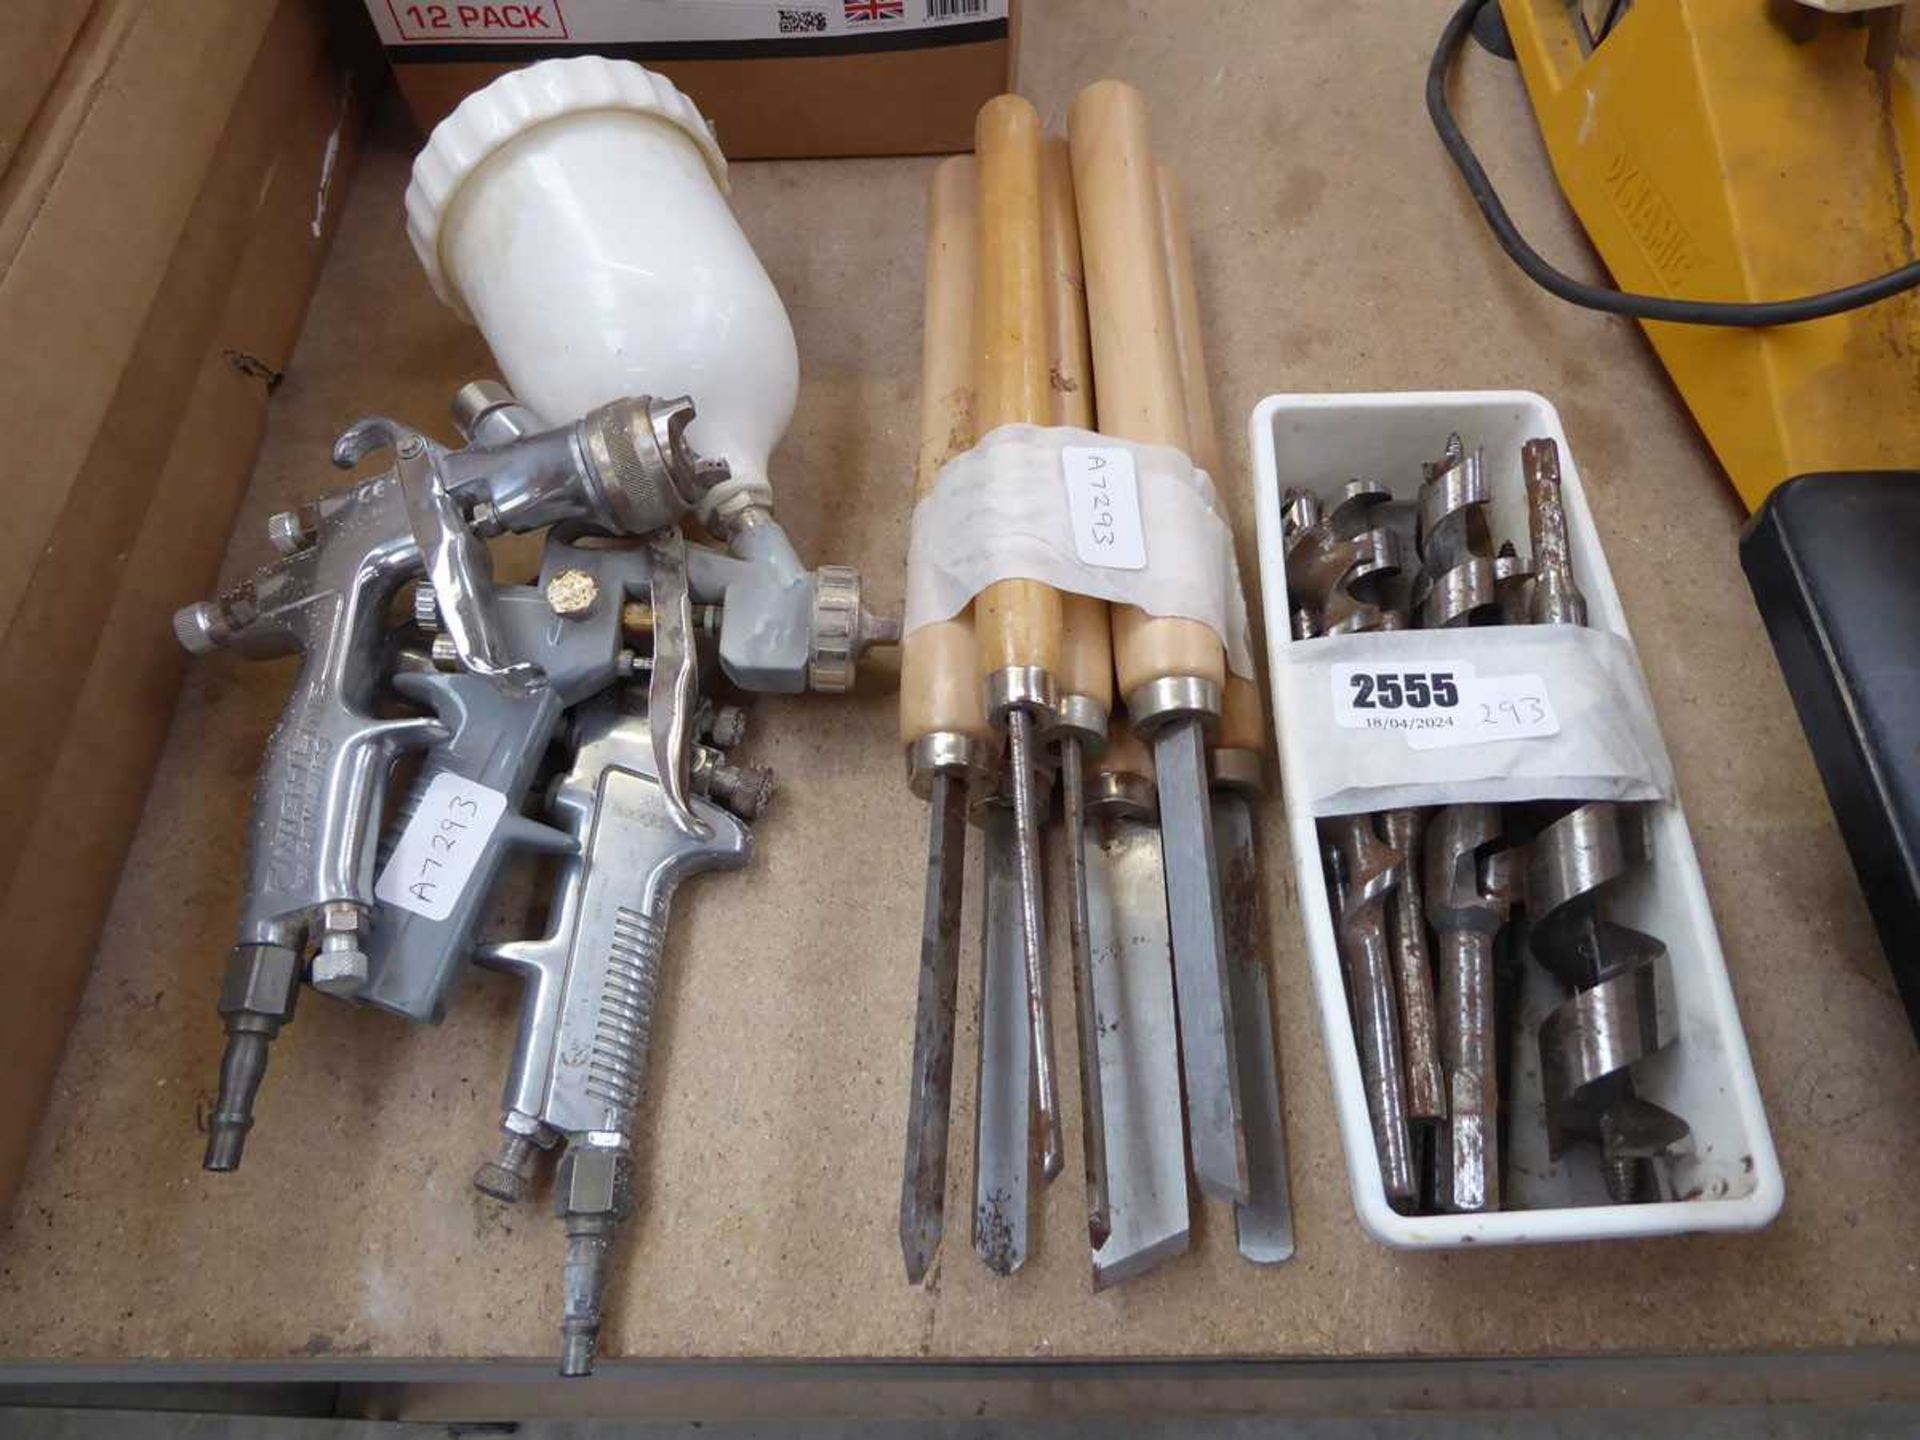 3 spray guns together with a quantity of carpenter's chisels and a Linbin of mixed size drill bits